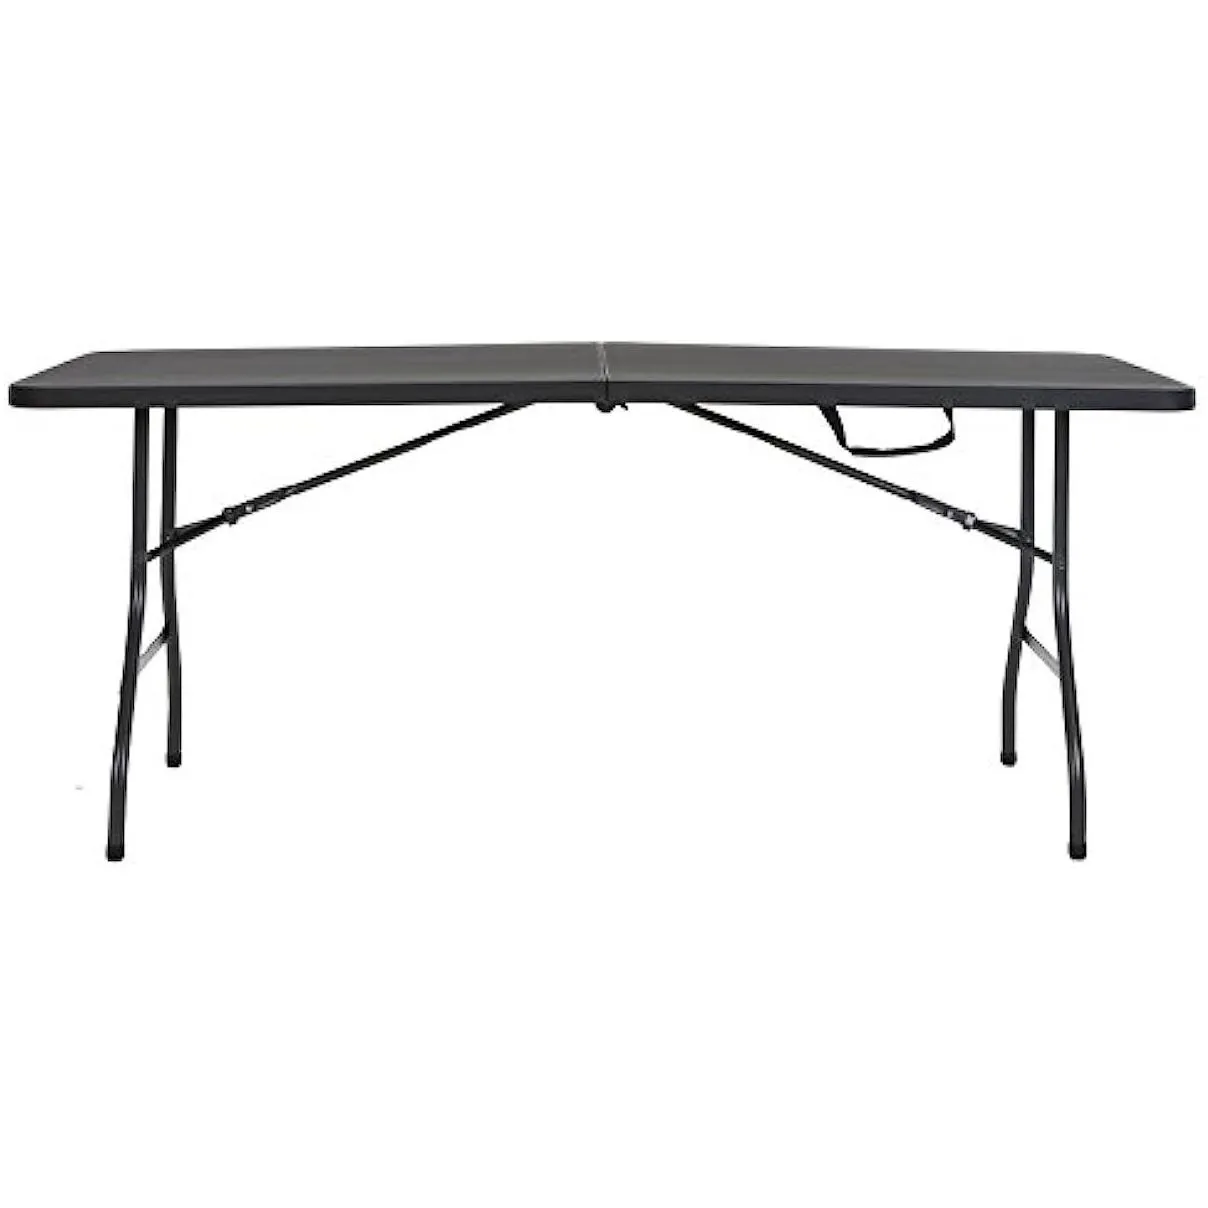 Camp Furniture Cosco Deluxe 6 Foot X 30 Inch Fold In Half Blow Molded Folding Table Black Carp Drop Delivery Sports Outdoors Camping H Dh9Xw